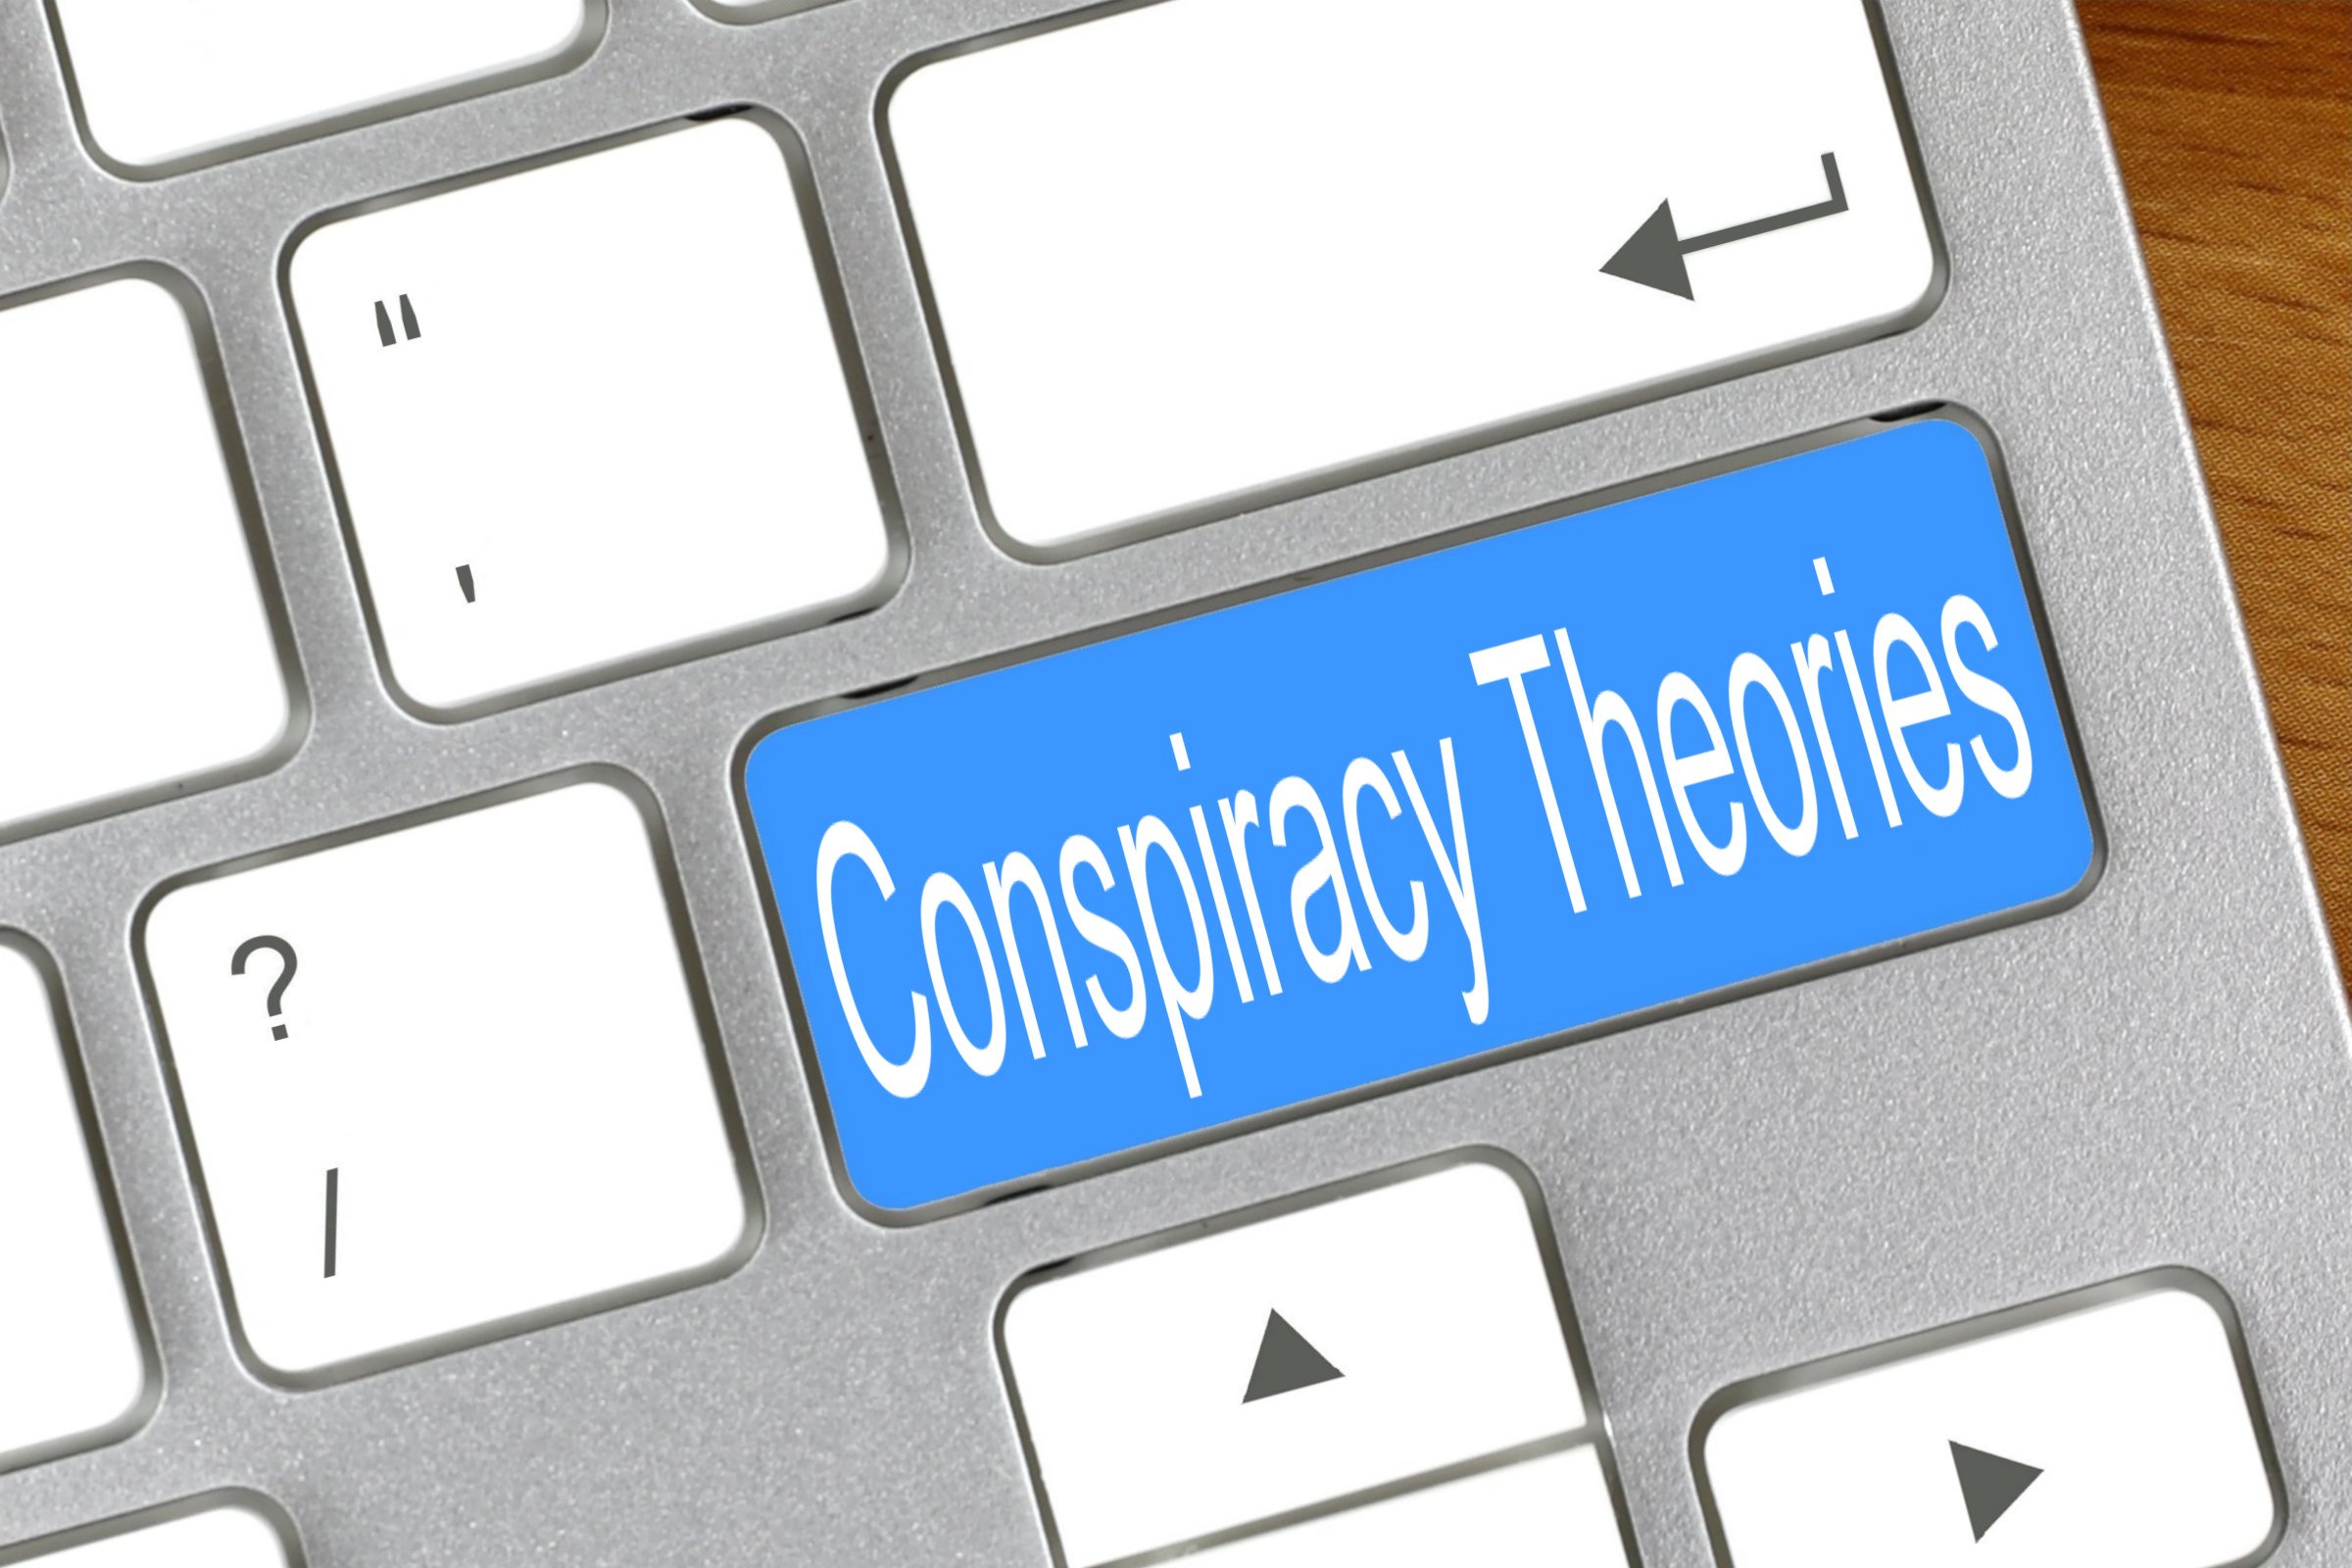 conspiracy theories